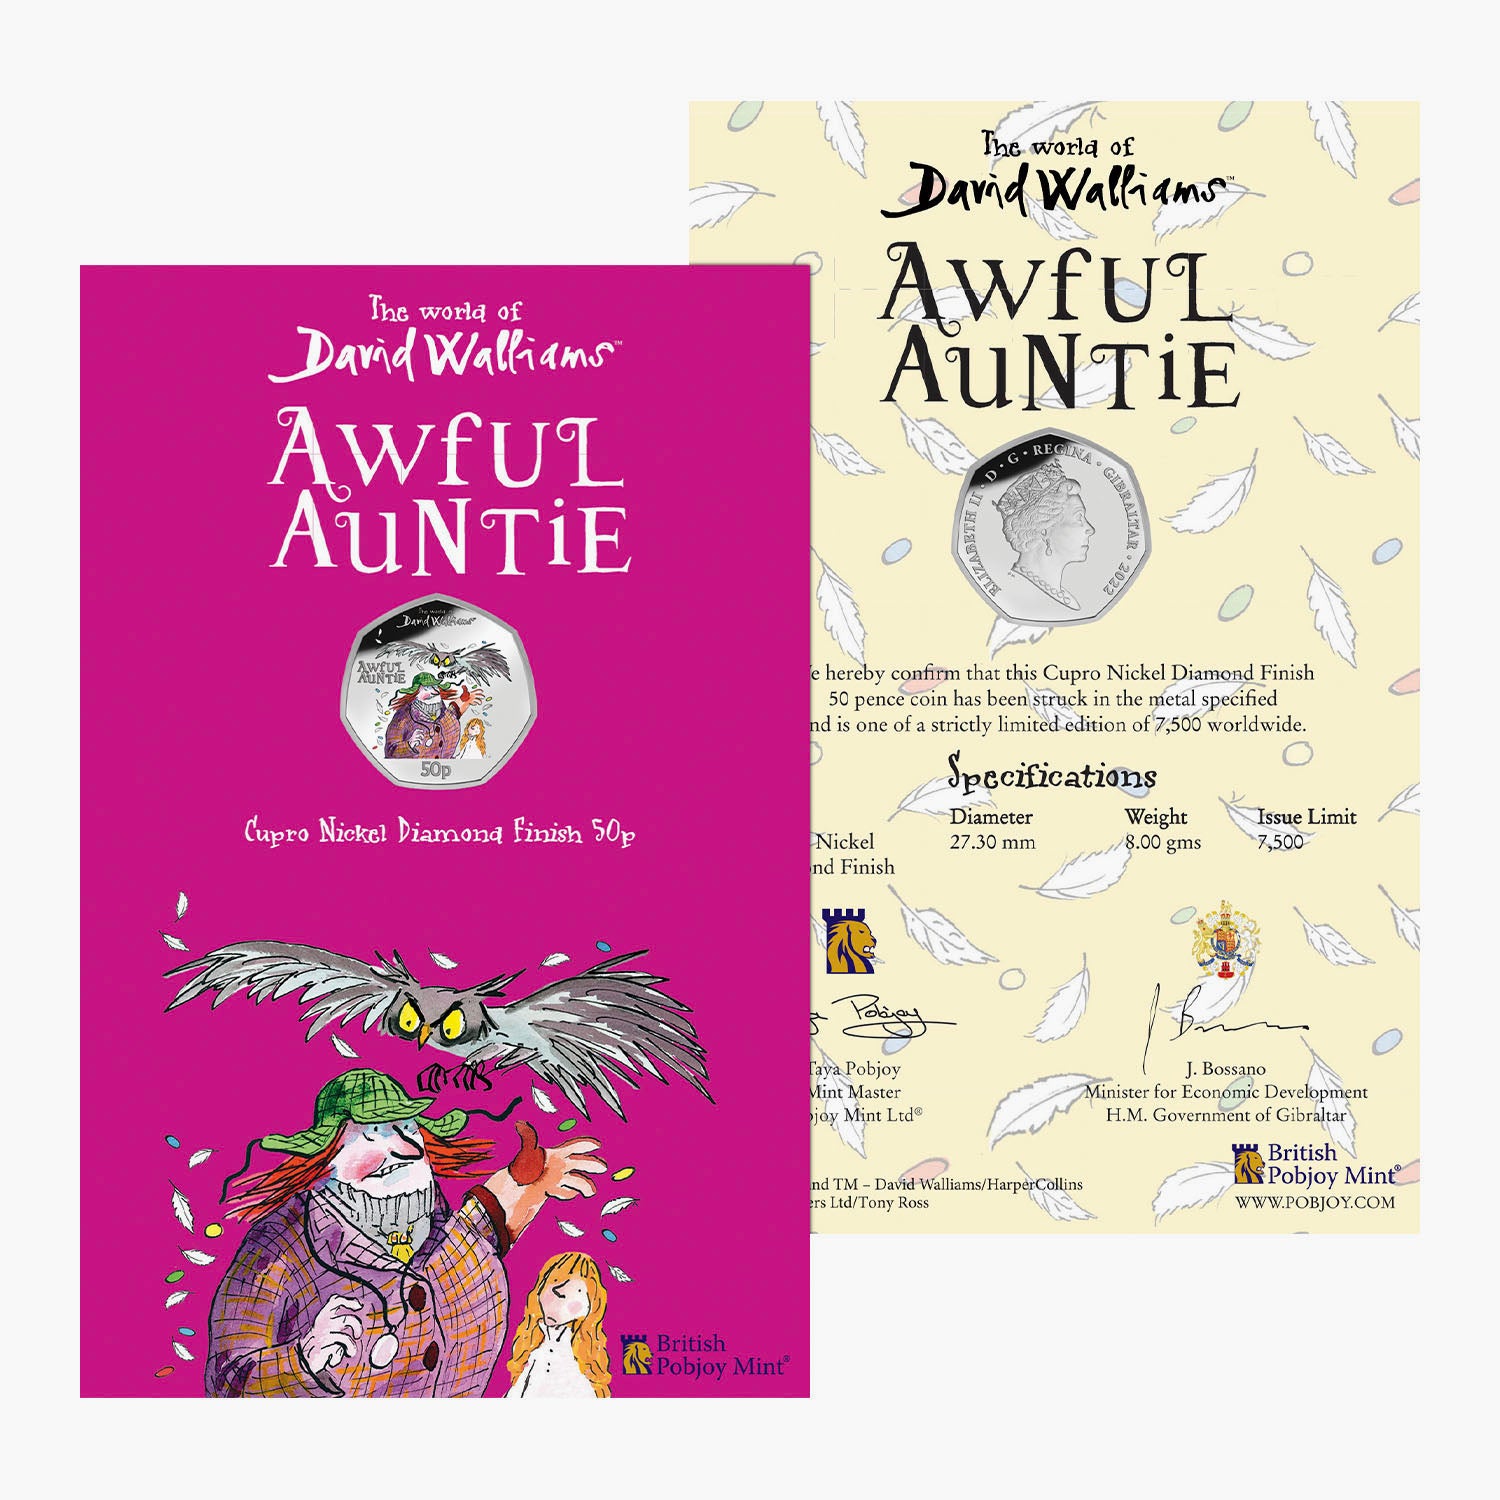 David Walliams Awful Auntie 50p with Colour